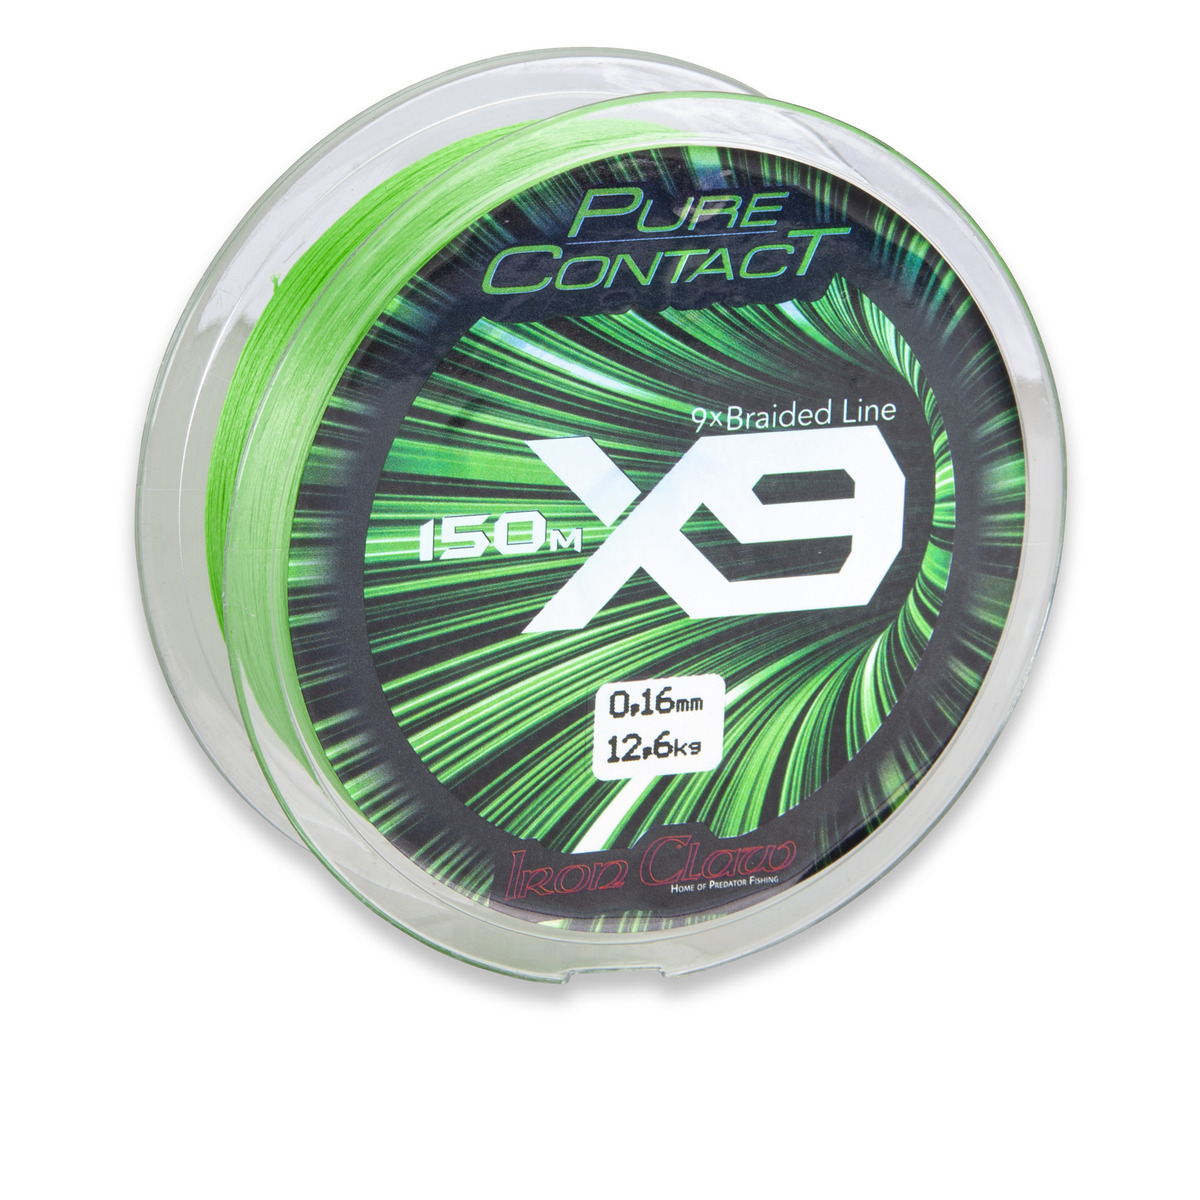 Iron Claw Pure Contact X9 Green - 1500 m 0.16 mm